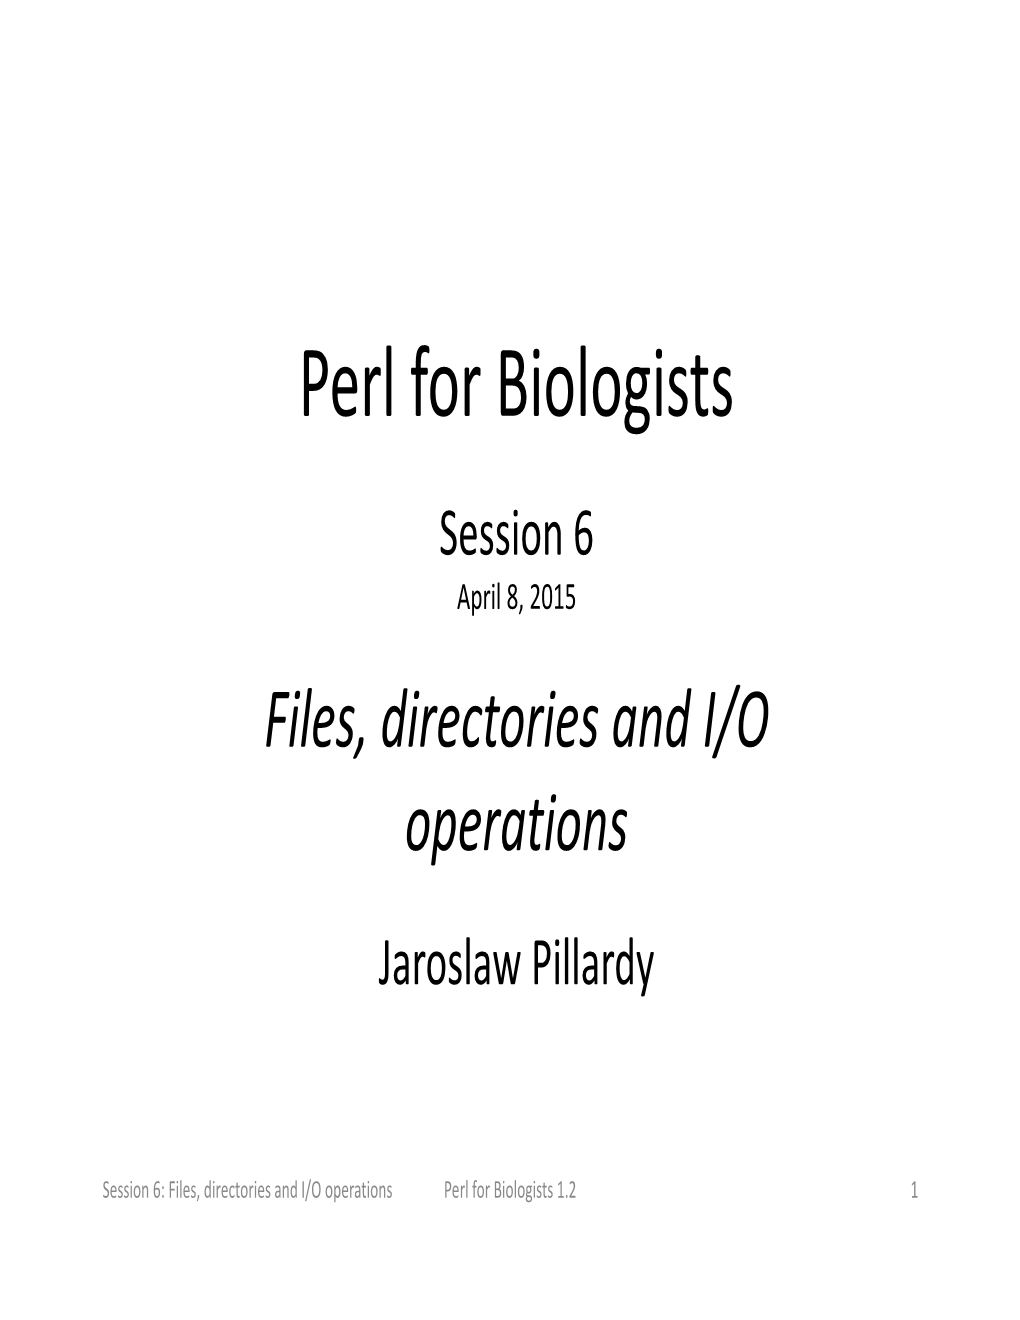 Perl for Biologists Session 6 April 8, 2015 Files, Directories and I/O Operations Jaroslaw Pillardy